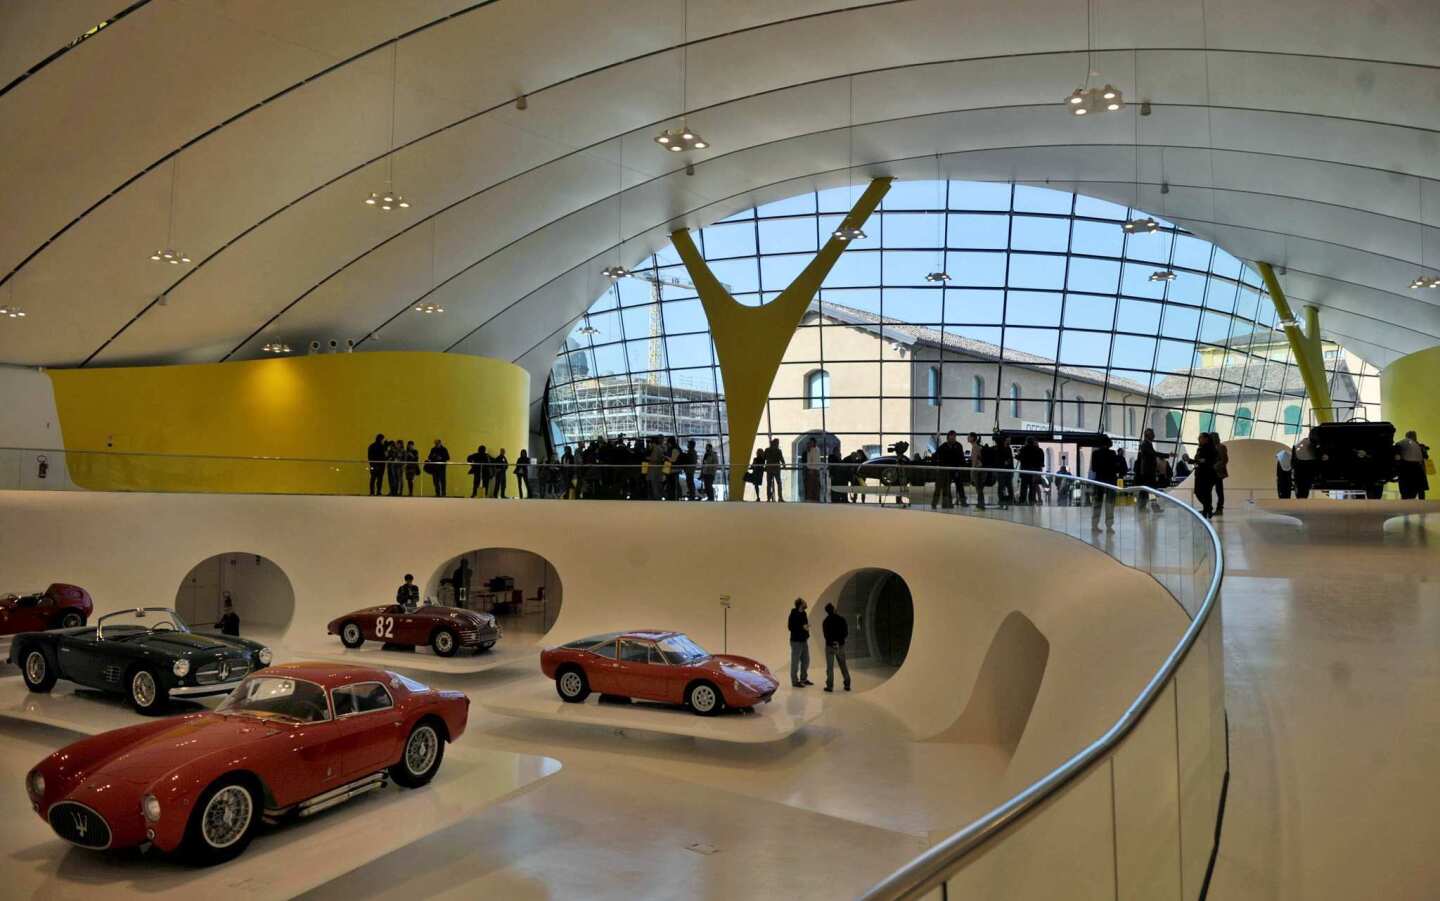 The birthplace of Enzo Ferrari, seen here beyond the windows of the museum's new building.